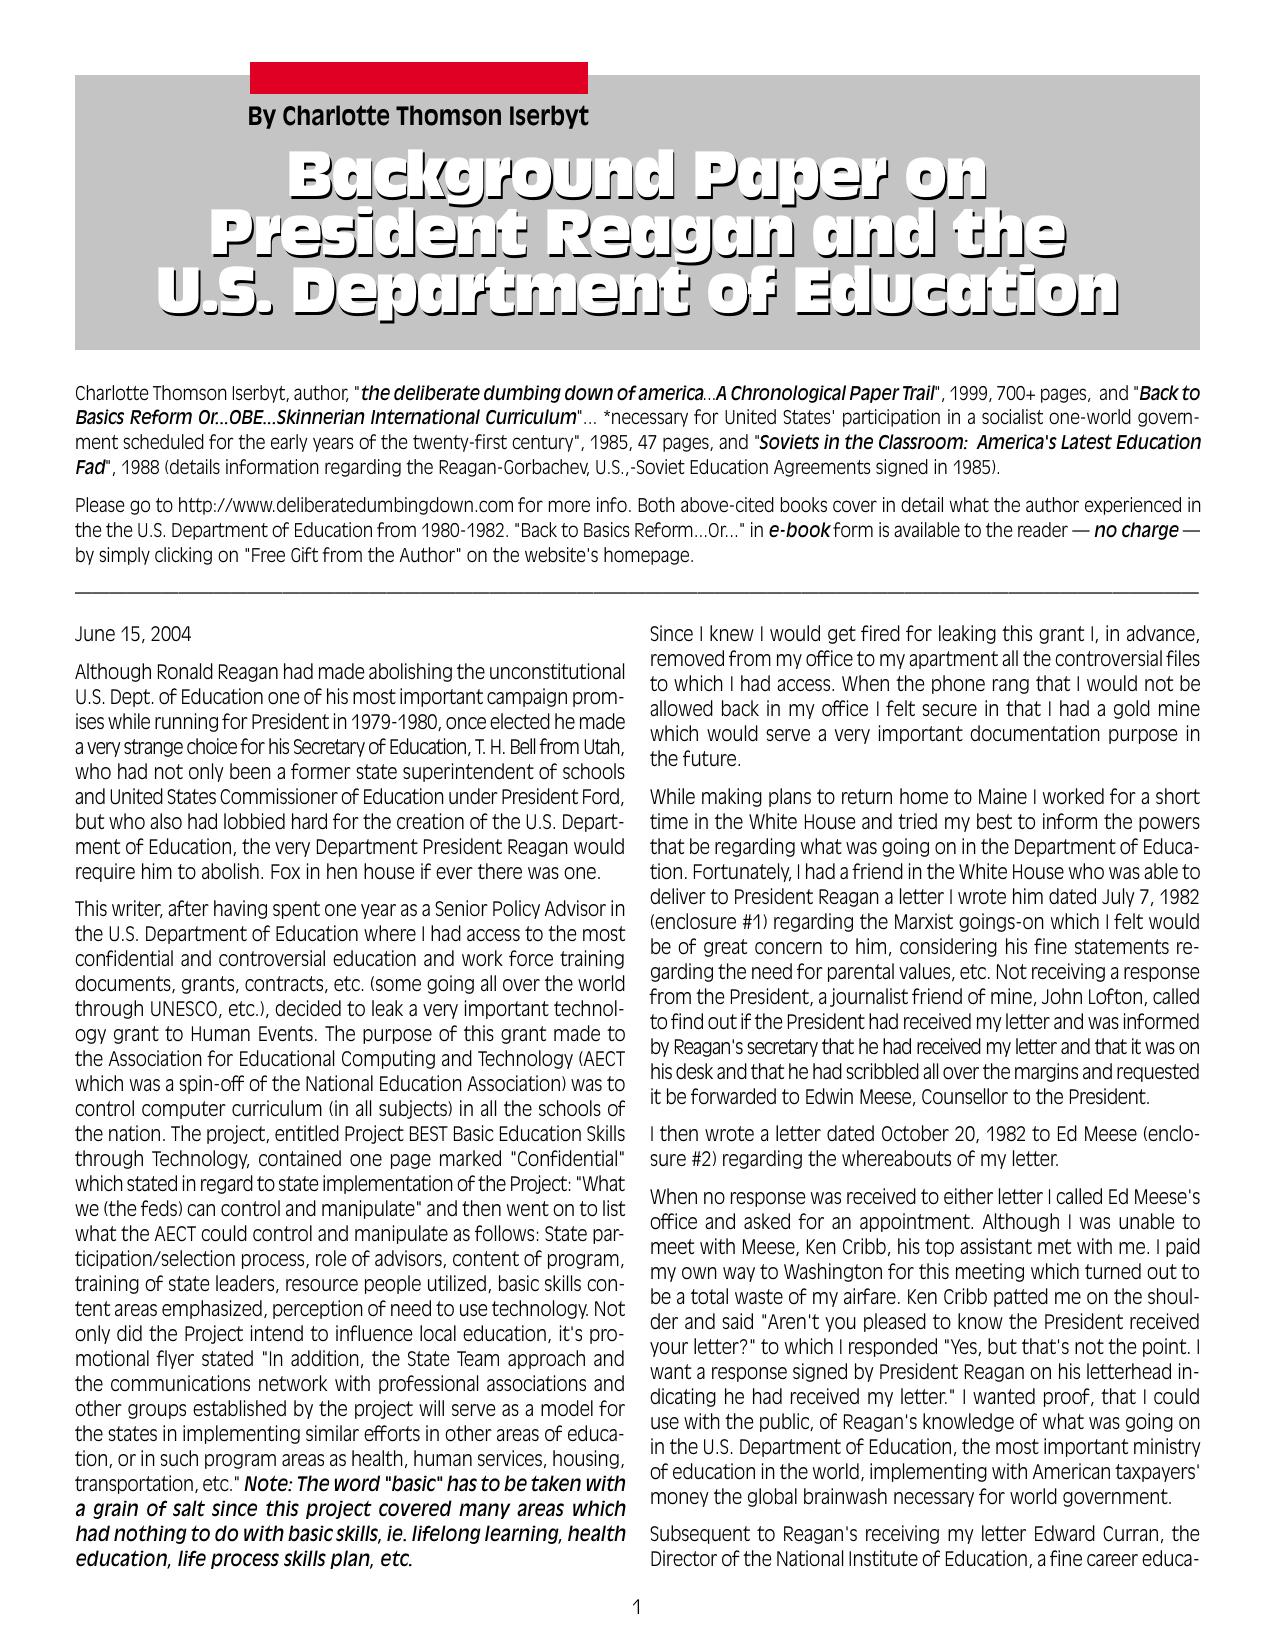 Background Paper on President Reagan and the U.S. Department of Education